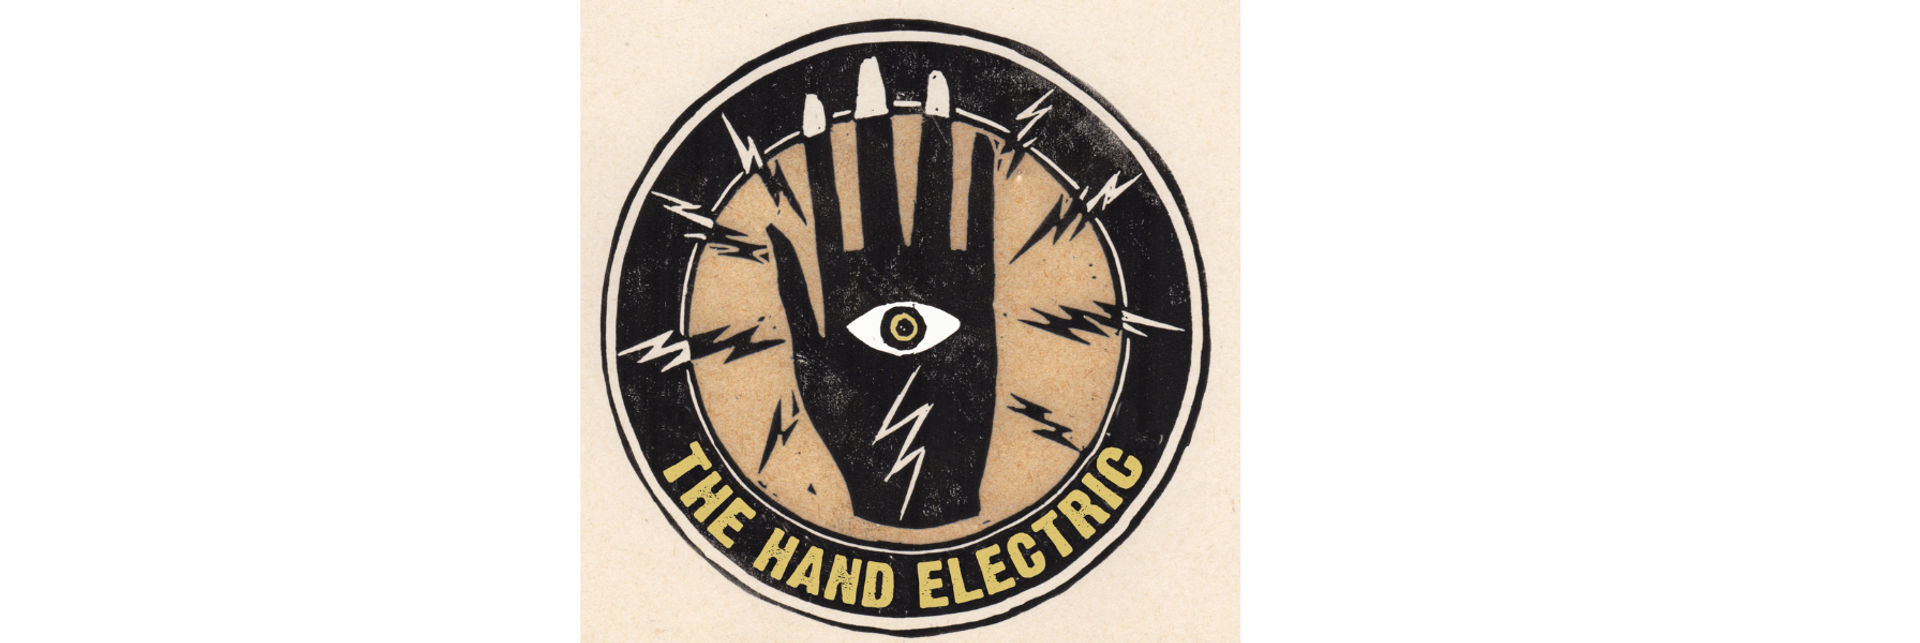 The Hand Electric